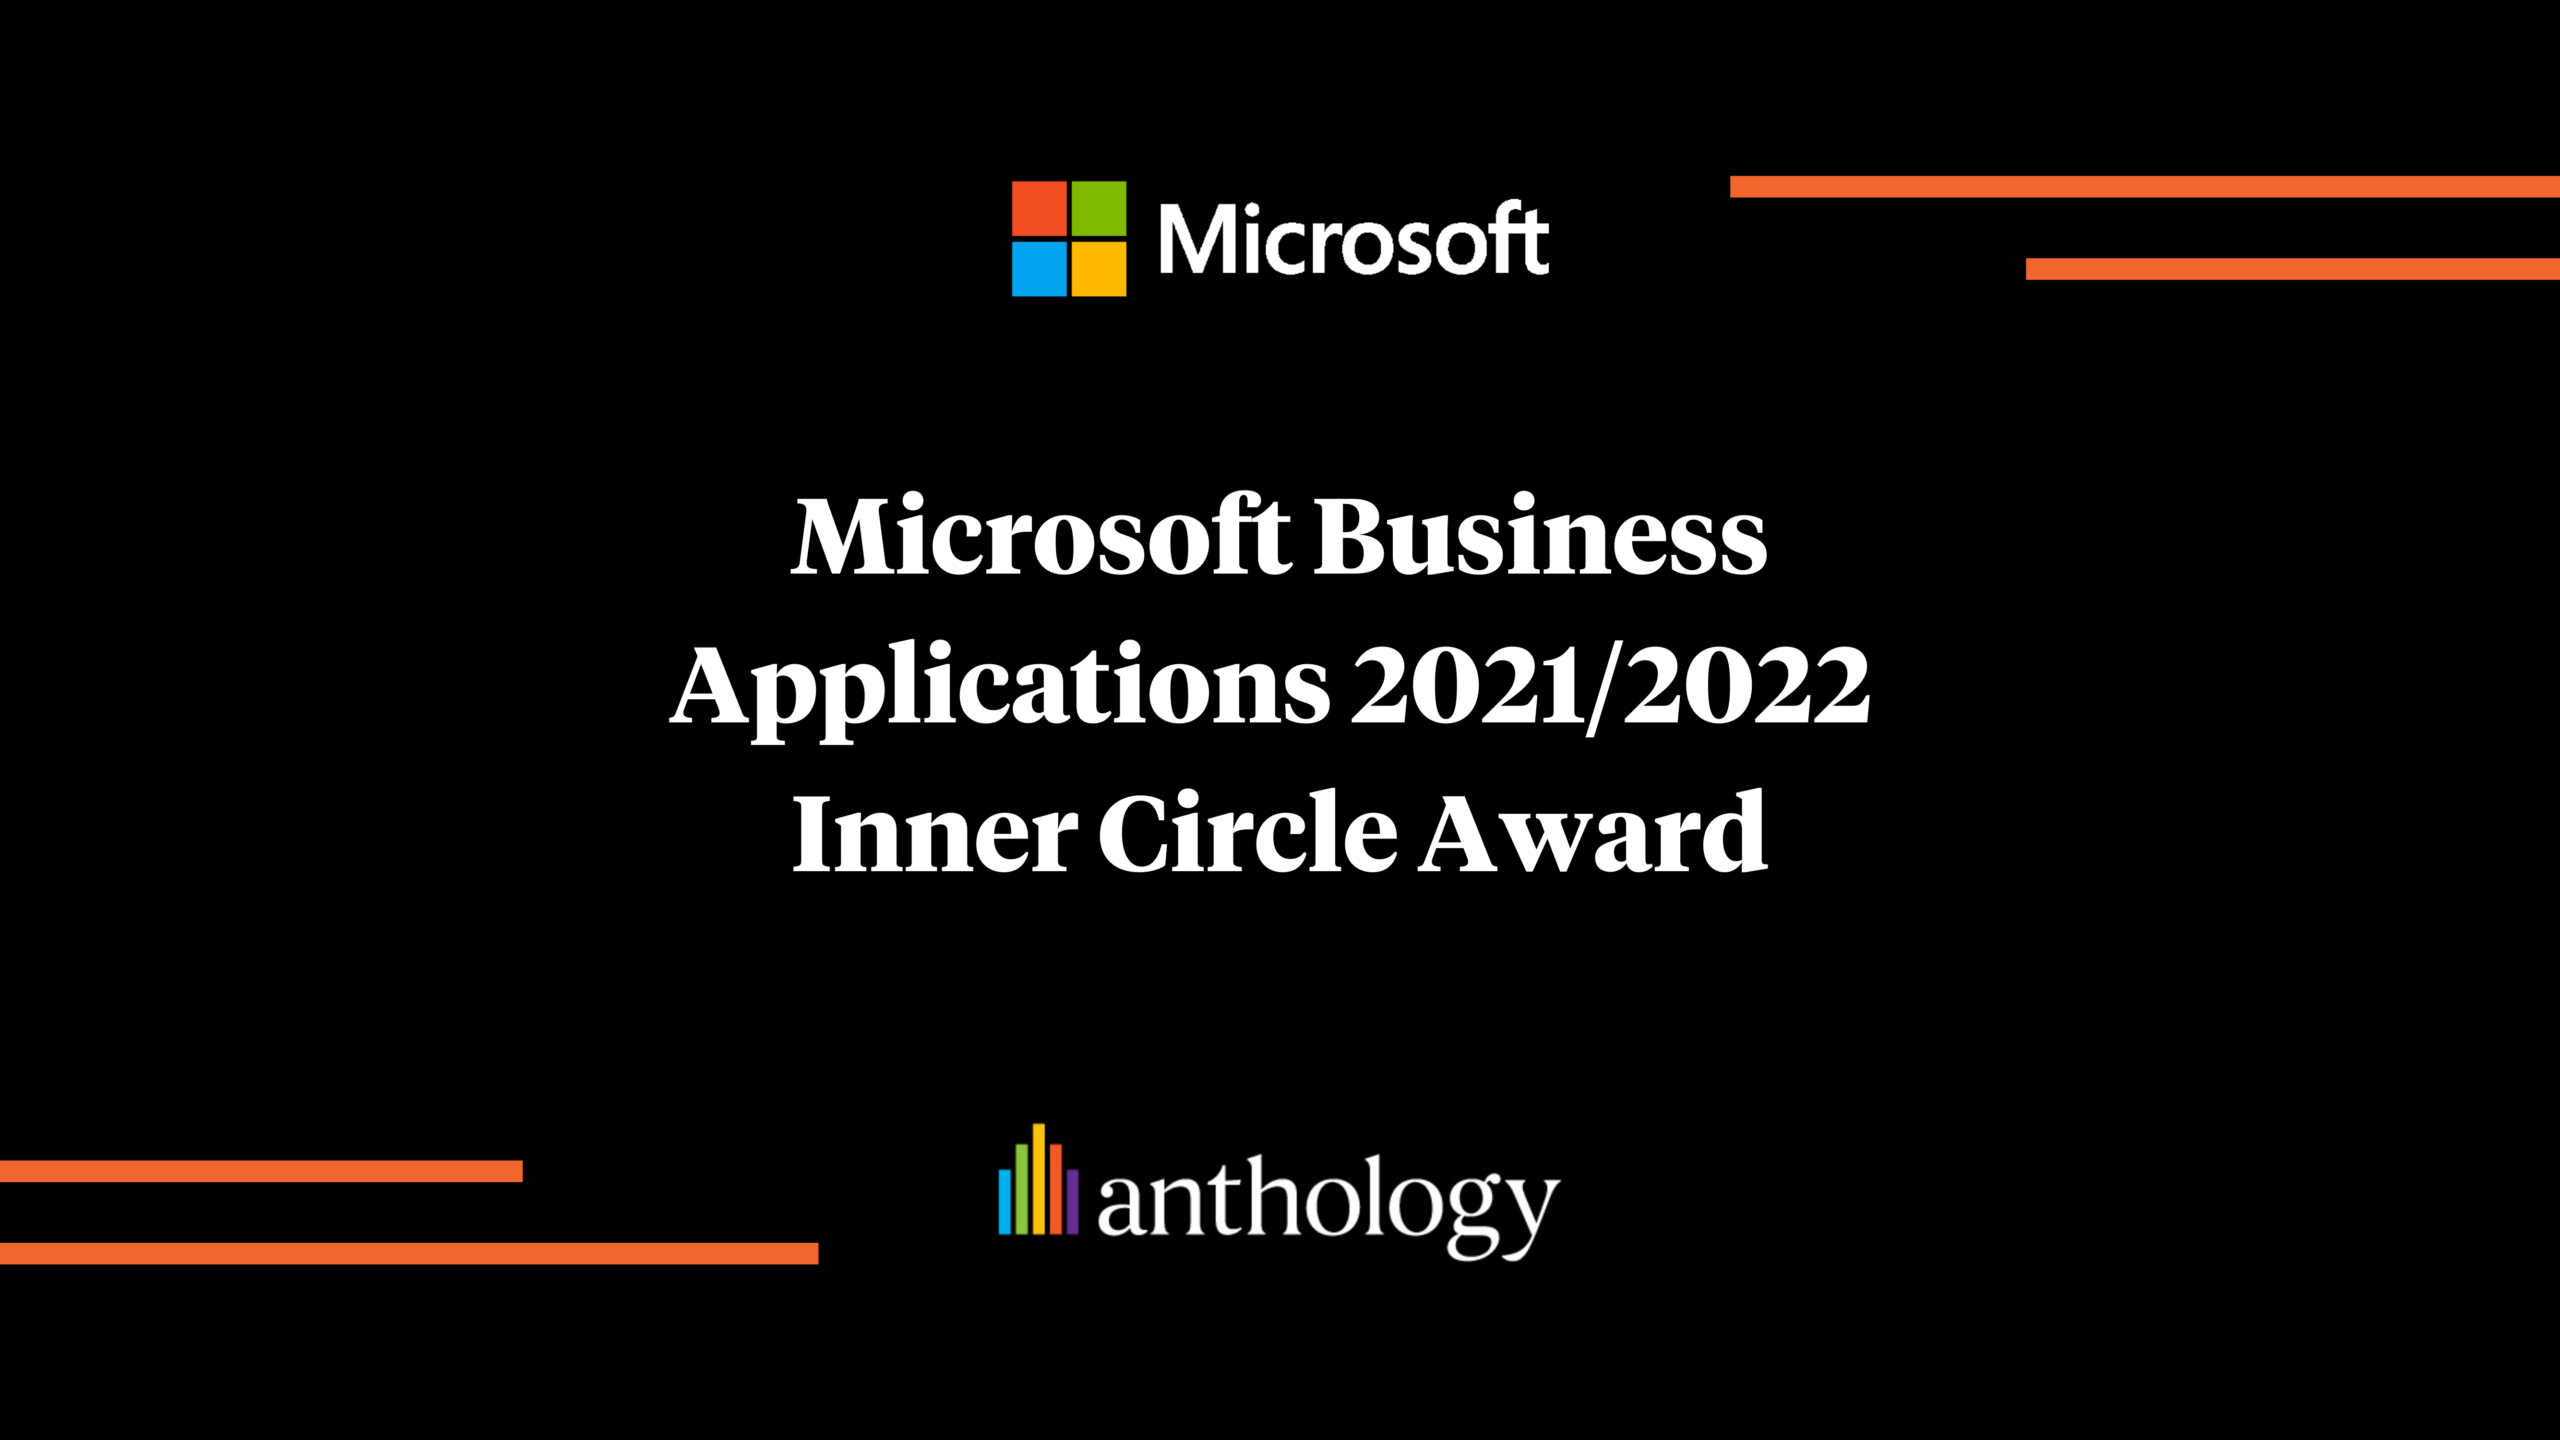 Image with the Microsoft and Anthology logos and the text, Microsoft Business Applications 2021/2022 Inner Circle Awards